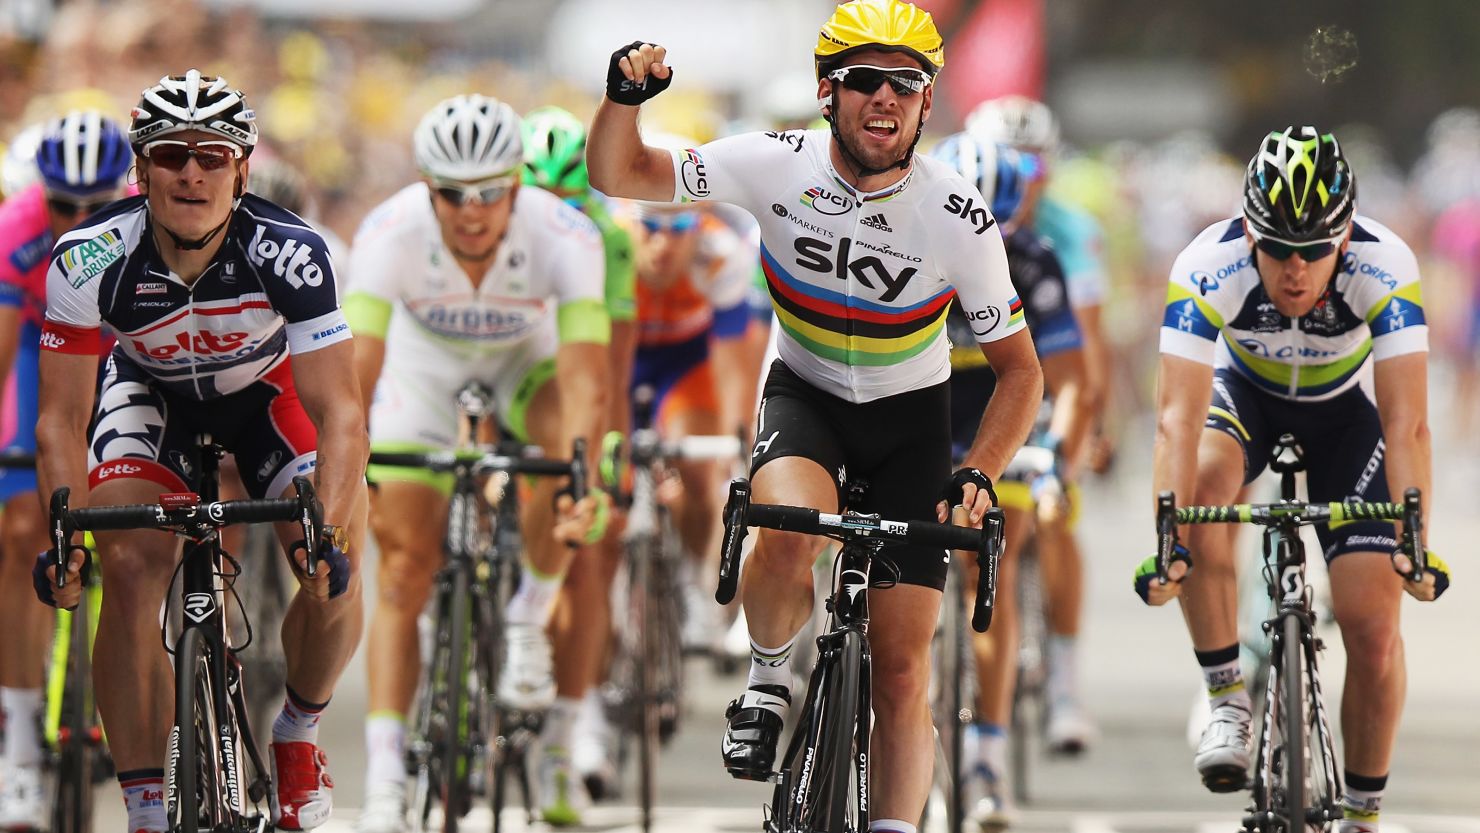 Mark Cavendish crosses the line in triumph ahead of Andrei Greipel and Matt Goss on the second stage of the Tour de France. 